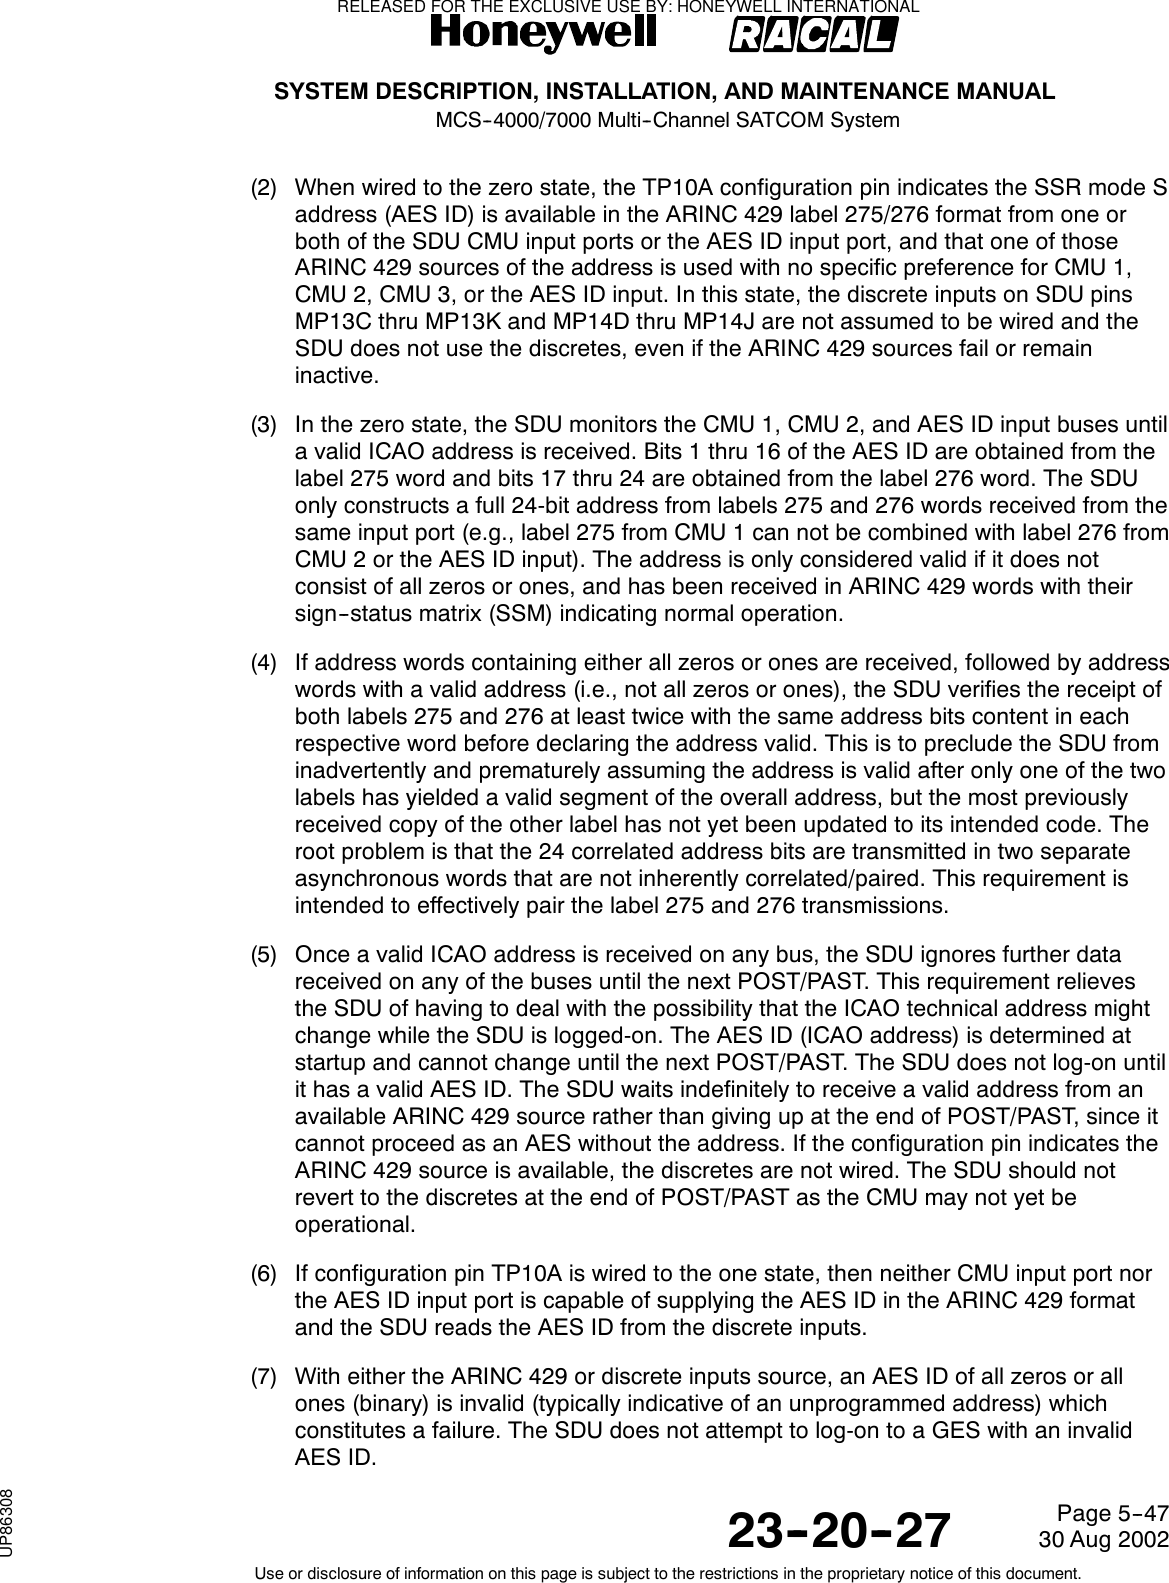 SYSTEM DESCRIPTION, INSTALLATION, AND MAINTENANCE MANUALMCS--4000/7000 Multi--Channel SATCOM System23--20--2730 Aug 2002Use or disclosure of information on this page is subject to the restrictions in the proprietary notice of this document.Page 5--47(2) When wired to the zero state, the TP10A configuration pin indicates the SSR mode Saddress (AES ID) is available in the ARINC 429 label 275/276 format from one orboth of the SDU CMU input ports or the AES ID input port, and that one of thoseARINC 429 sources of the address is used with no specific preference for CMU 1,CMU 2, CMU 3, or the AES ID input. In this state, the discrete inputs on SDU pinsMP13C thru MP13K and MP14D thru MP14J are not assumed to be wired and theSDU does not use the discretes, even if the ARINC 429 sources fail or remaininactive.(3) In the zero state, the SDU monitors the CMU 1, CMU 2, and AES ID input buses untila valid ICAO address is received. Bits 1 thru 16 of the AES ID are obtained from thelabel 275 word and bits 17 thru 24 are obtained from the label 276 word. The SDUonly constructs a full 24-bit address from labels 275 and 276 words received from thesame input port (e.g., label 275 from CMU 1 can not be combined with label 276 fromCMU 2 or the AES ID input). The address is only considered valid if it does notconsist of all zeros or ones, and has been received in ARINC 429 words with theirsign--status matrix (SSM) indicating normal operation.(4) If address words containing either all zeros or ones are received, followed by addresswords with a valid address (i.e., not all zeros or ones), the SDU verifies the receipt ofboth labels 275 and 276 at least twice with the same address bits content in eachrespective word before declaring the address valid. This is to preclude the SDU frominadvertently and prematurely assuming the address is valid after only one of the twolabels has yielded a valid segment of the overall address, but the most previouslyreceived copy of the other label has not yet been updated to its intended code. Theroot problem is that the 24 correlated address bits are transmitted in two separateasynchronous words that are not inherently correlated/paired. This requirement isintended to effectively pair the label 275 and 276 transmissions.(5) Once a valid ICAO address is received on any bus, the SDU ignores further datareceived on any of the buses until the next POST/PAST. This requirement relievesthe SDU of having to deal with the possibility that the ICAO technical address mightchange while the SDU is logged-on. The AES ID (ICAO address) is determined atstartup and cannot change until the next POST/PAST. The SDU does not log-on untilit has a valid AES ID. The SDU waits indefinitely to receive a valid address from anavailable ARINC 429 source rather than giving up at the end of POST/PAST, since itcannot proceed as an AES without the address. If the configuration pin indicates theARINC 429 source is available, the discretes are not wired. The SDU should notrevert to the discretes at the end of POST/PAST as the CMU may not yet beoperational.(6) If configuration pin TP10A is wired to the one state, then neither CMU input port northe AES ID input port is capable of supplying the AES ID in the ARINC 429 formatand the SDU reads the AES ID from the discrete inputs.(7) With either the ARINC 429 or discrete inputs source, an AES ID of all zeros or allones (binary) is invalid (typically indicative of an unprogrammed address) whichconstitutes a failure. The SDU does not attempt to log-on to a GES with an invalidAES ID.RELEASED FOR THE EXCLUSIVE USE BY: HONEYWELL INTERNATIONALUP86308